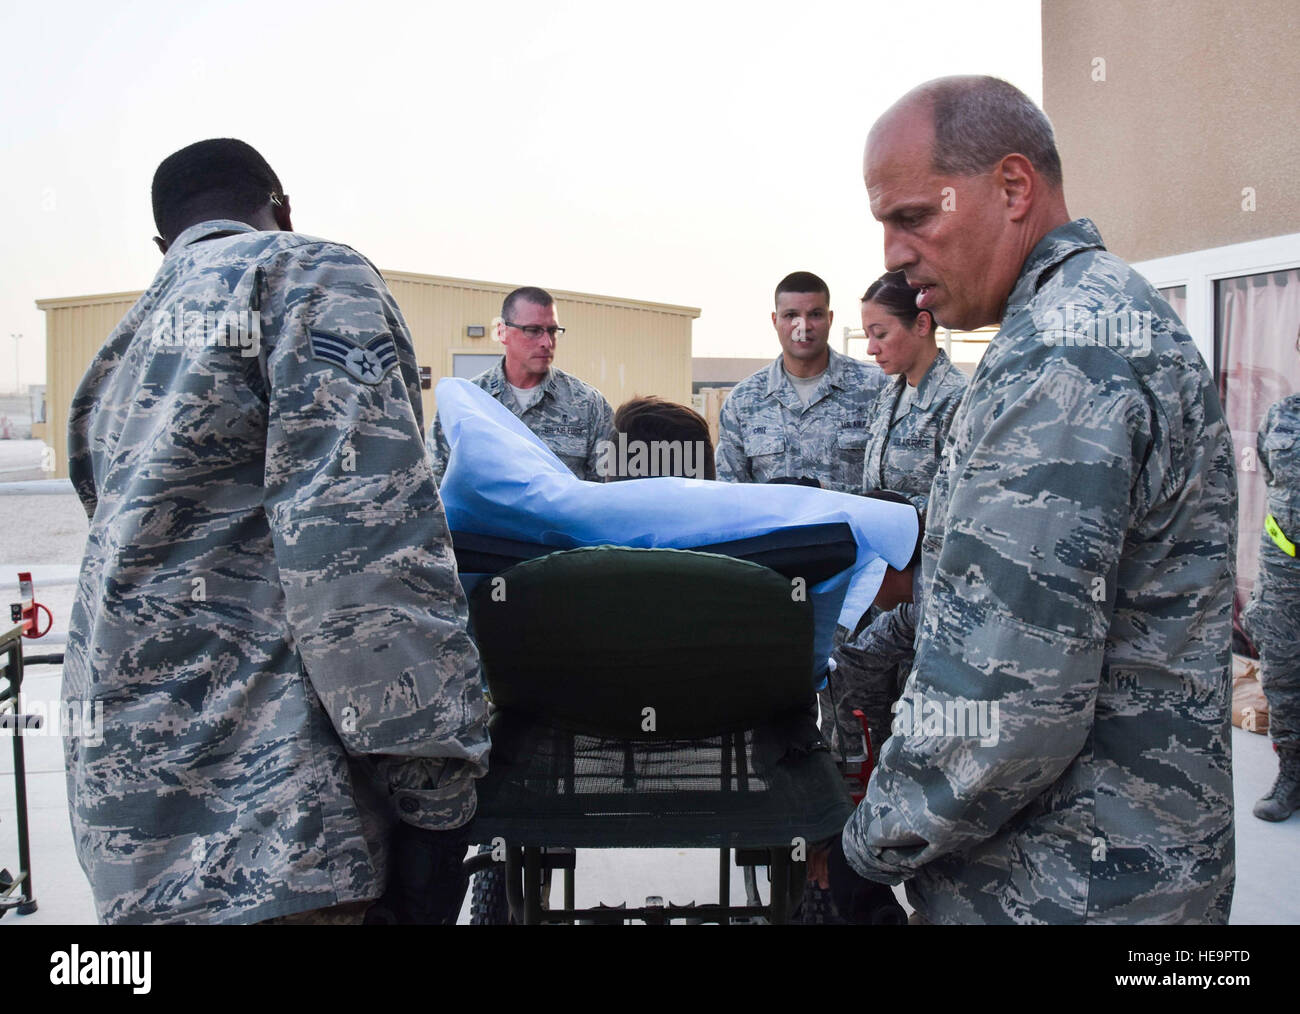 Lt. Col. Chris Hull, right, flight commander of the 379th Expeditionary Medical Group Enroute Patient Staging Facility, guides his medical team during the loading of a stretchered patient into an ambulance for evacuation July 18, 2016, at Al Udeid Air Base, Qatar. The team prepared 14 patients, including a military working dog, to be transported on a C-17 Globemaster III flight to U.S. military facilities in Germany. Technical Sgt. Carlos J. Treviño) Stock Photo